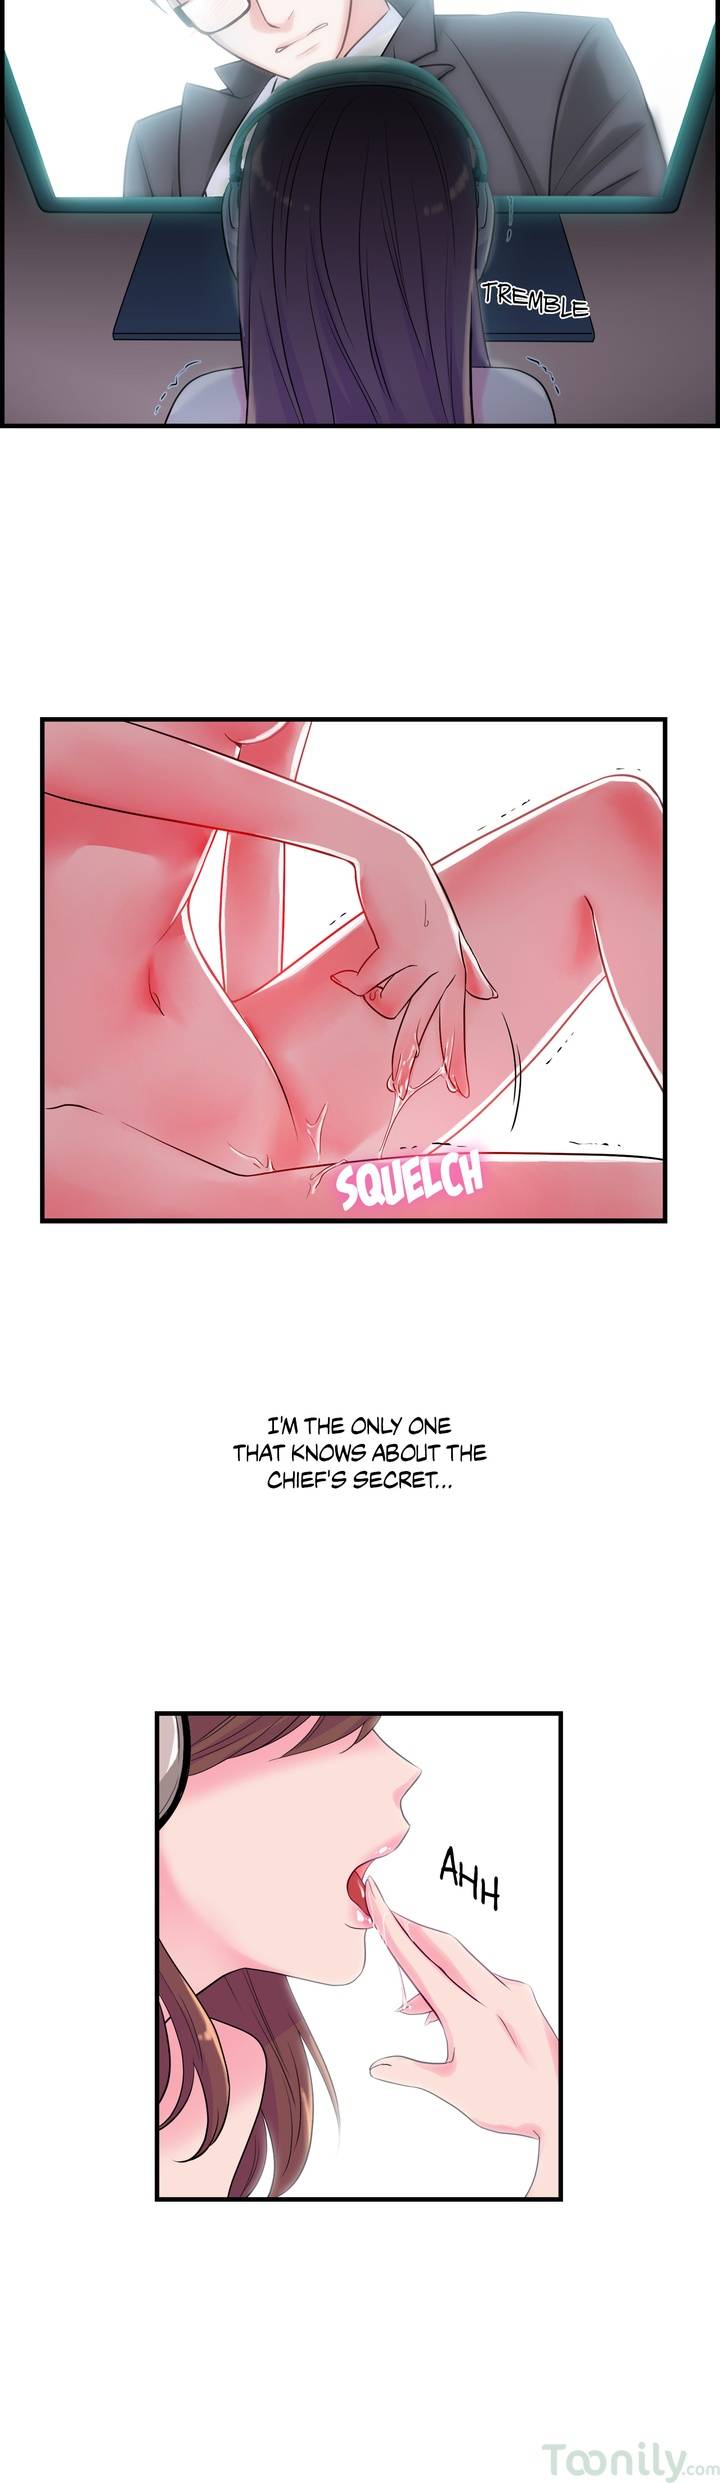 Masters of Masturbation - Chapter 2 Page 6